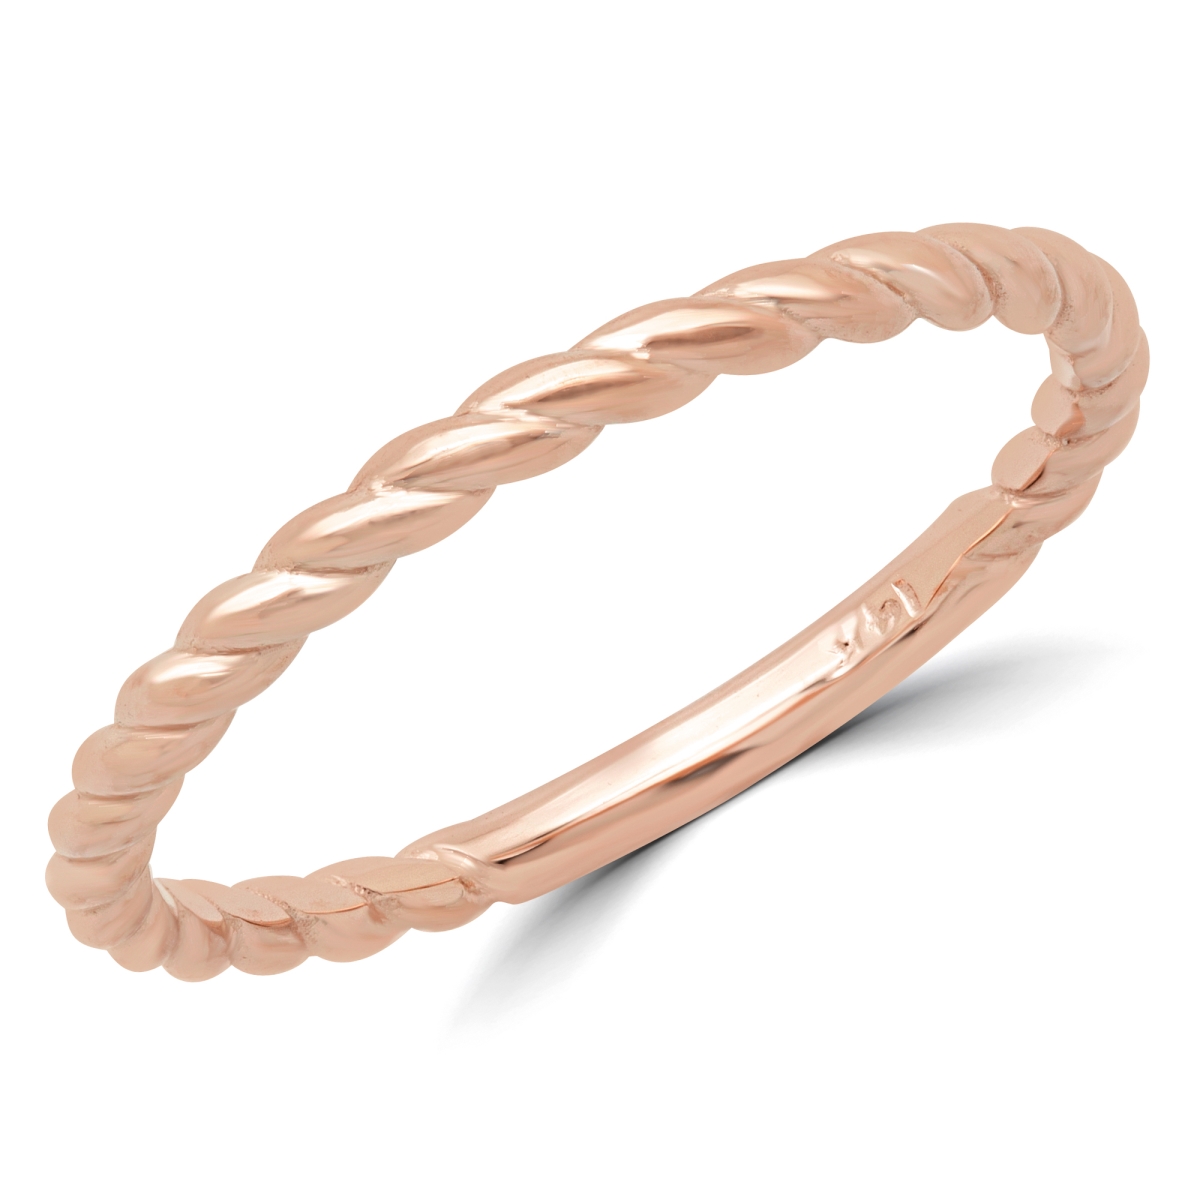 Picture of Majesty Diamonds MD180603-7.25 Braided Rope Classic Wedding Band Ring in 14K Rose Gold - Size 7.25